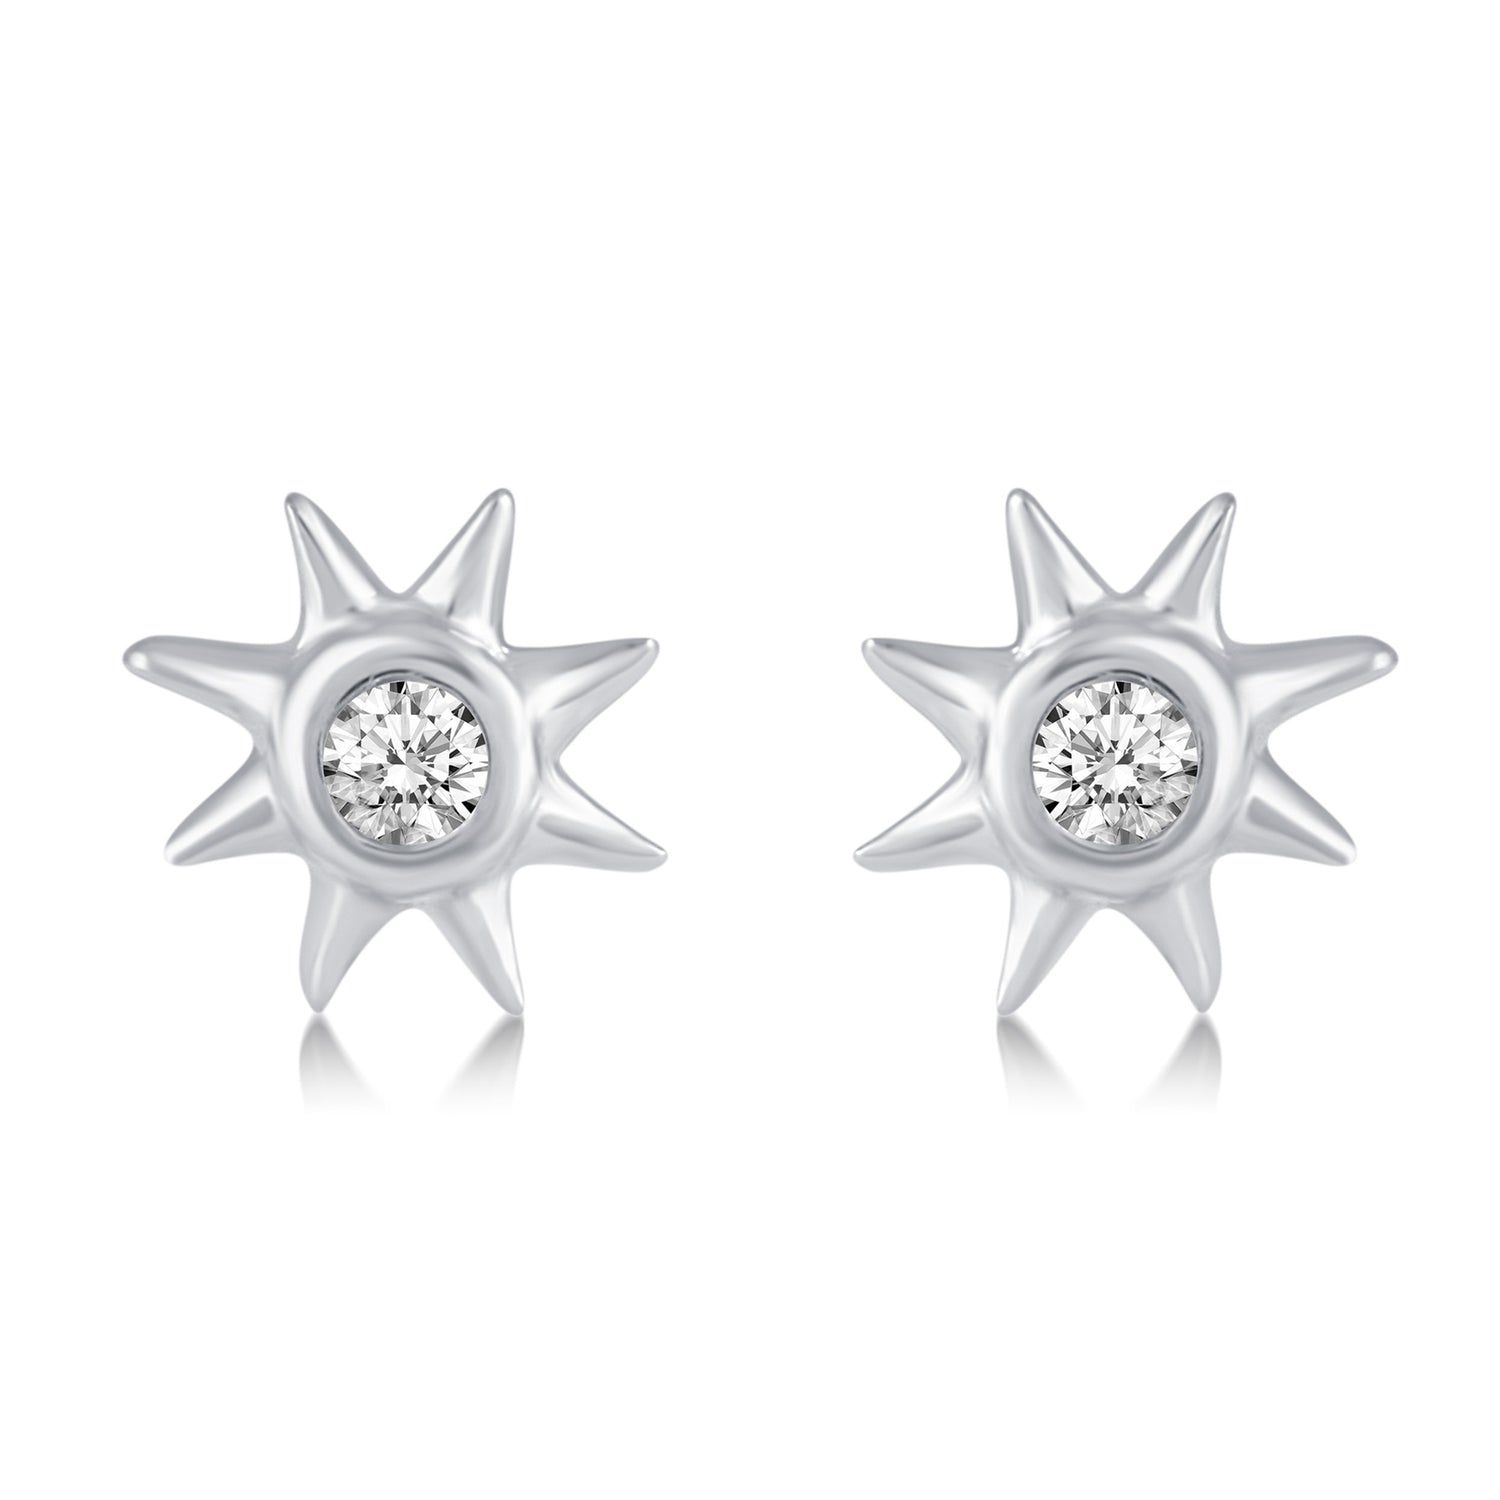 3 Pairs Set Ear Party 1/10 Cttw Natural Diamond Single Stone Sun Huggies Stud Earrings in 925 Sterling Silver